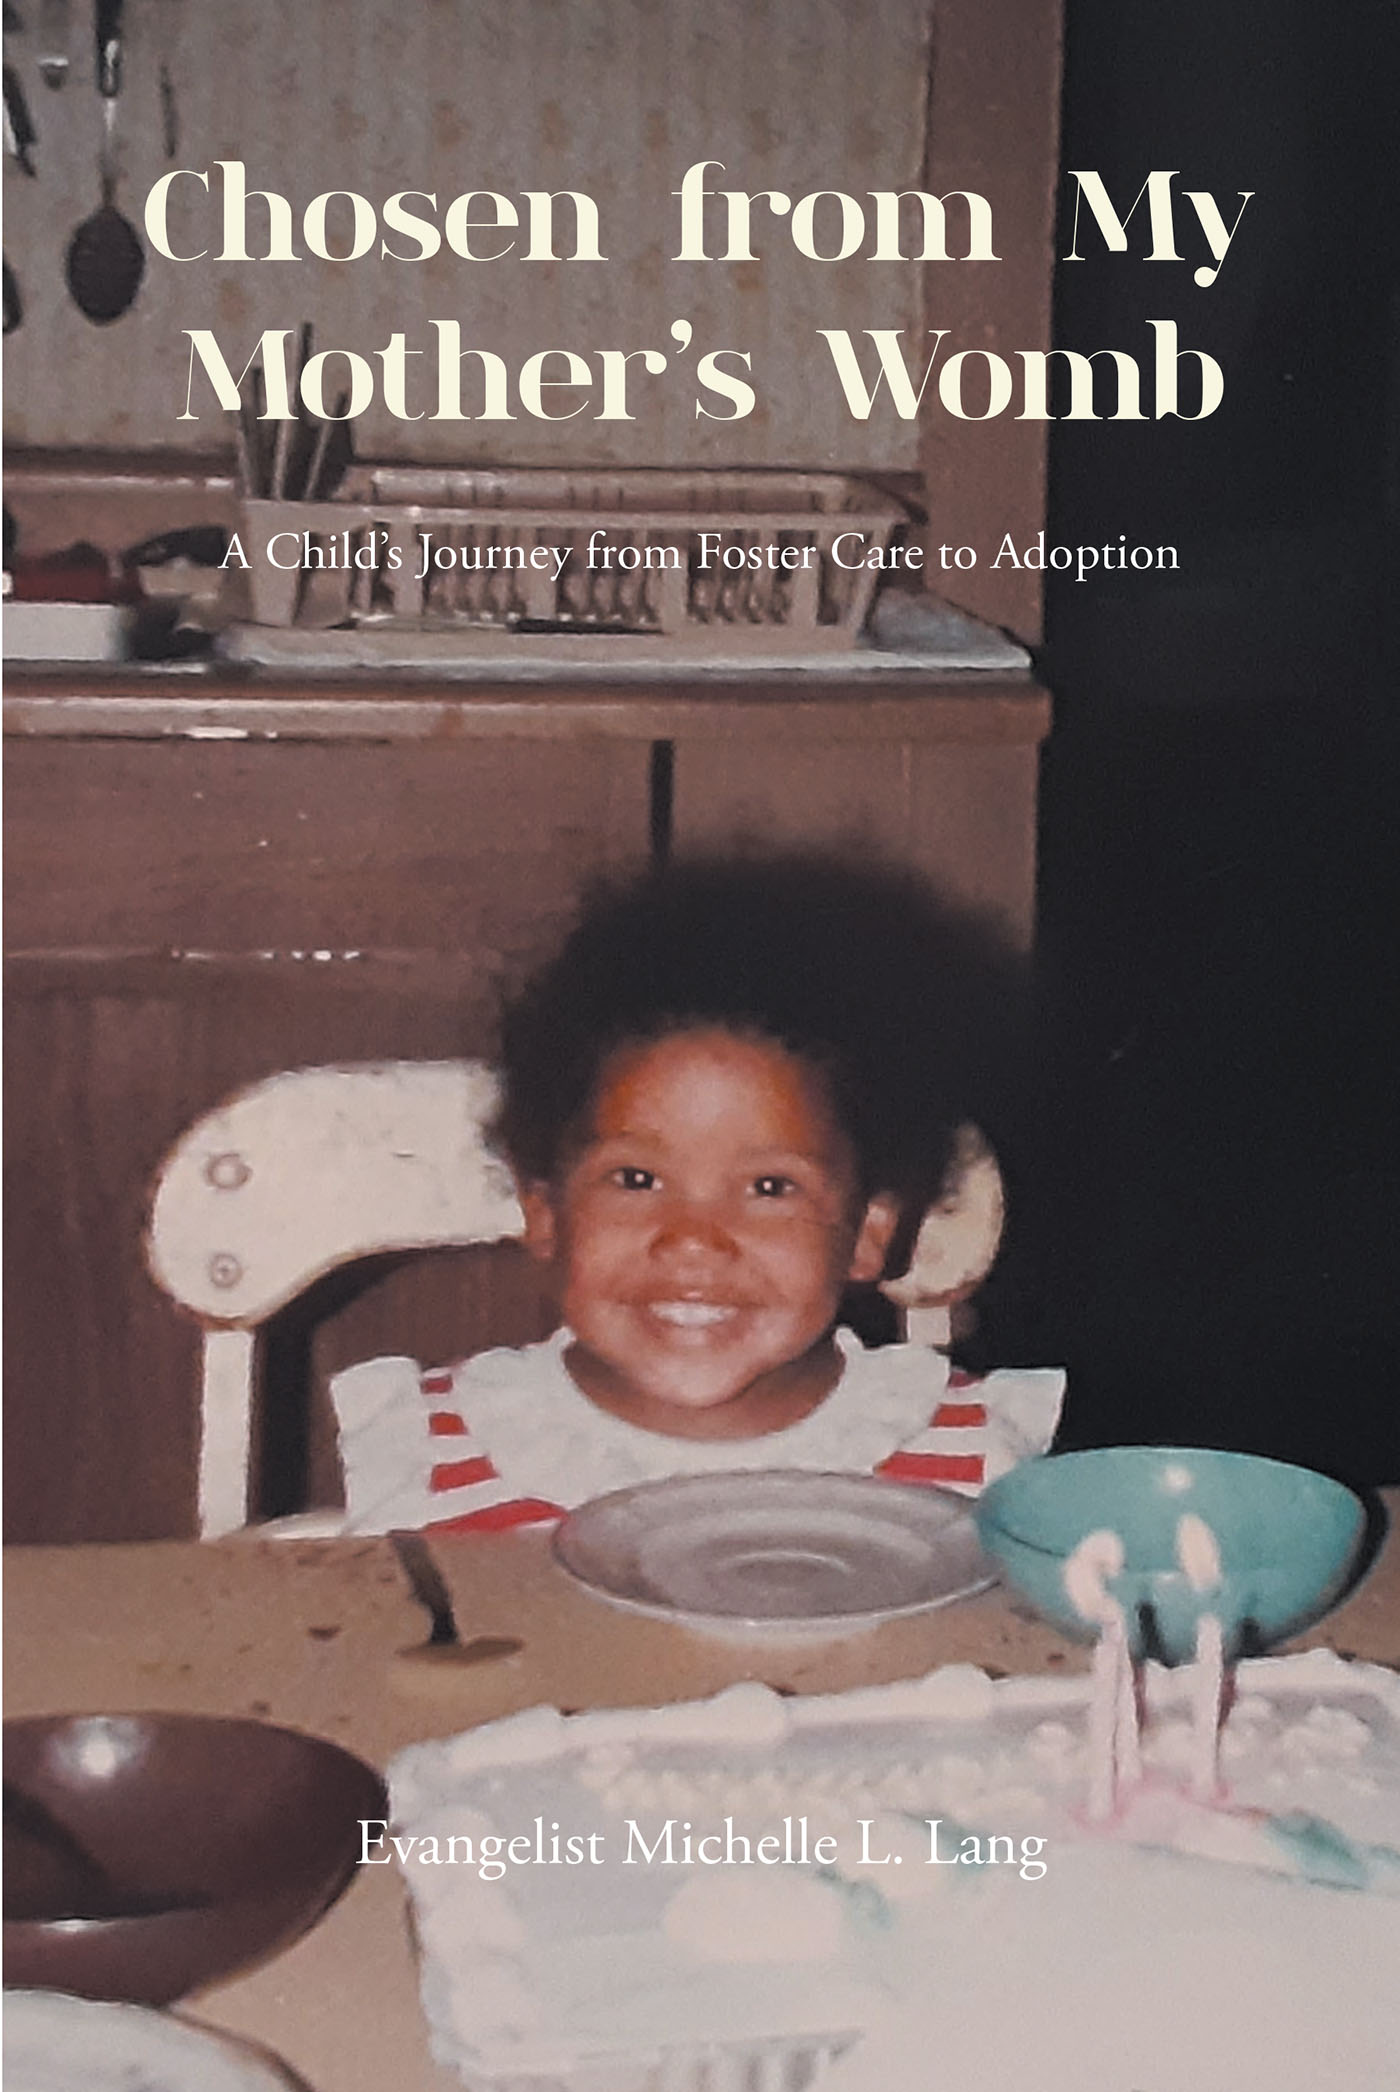 Evangelist Michelle Lang’s Newly Released “Chosen from My Mother’s Womb: A Child’s Journey from Foster Care to Adoption” is an Impactful Memoir